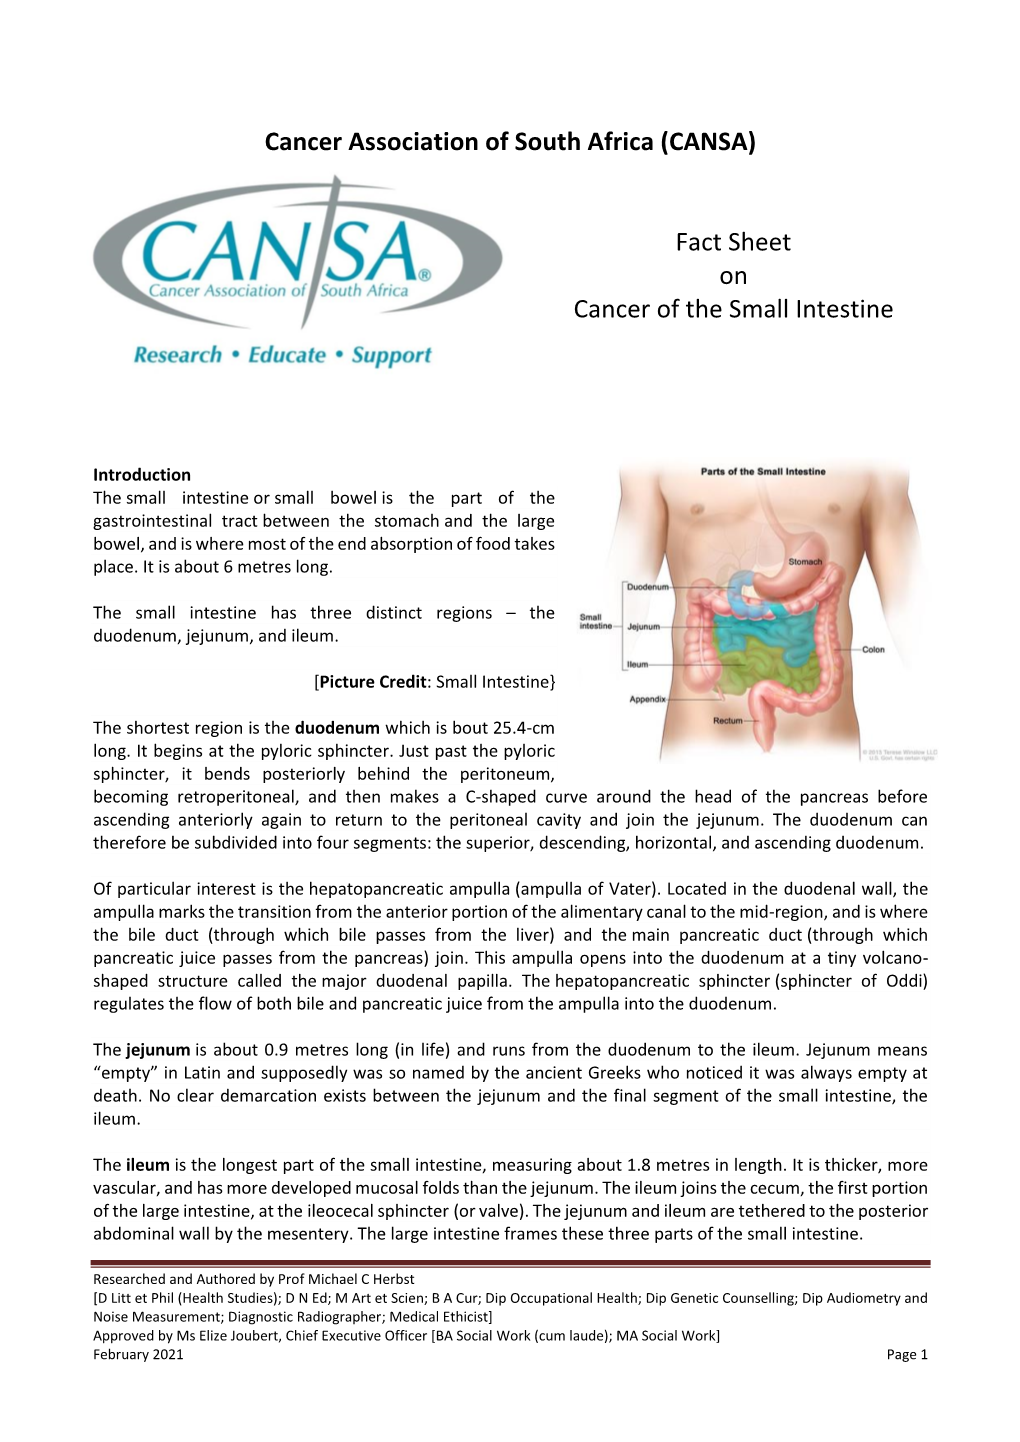 Cancer Association of South Africa (CANSA) Fact Sheet on Cancer of the Small Intestine